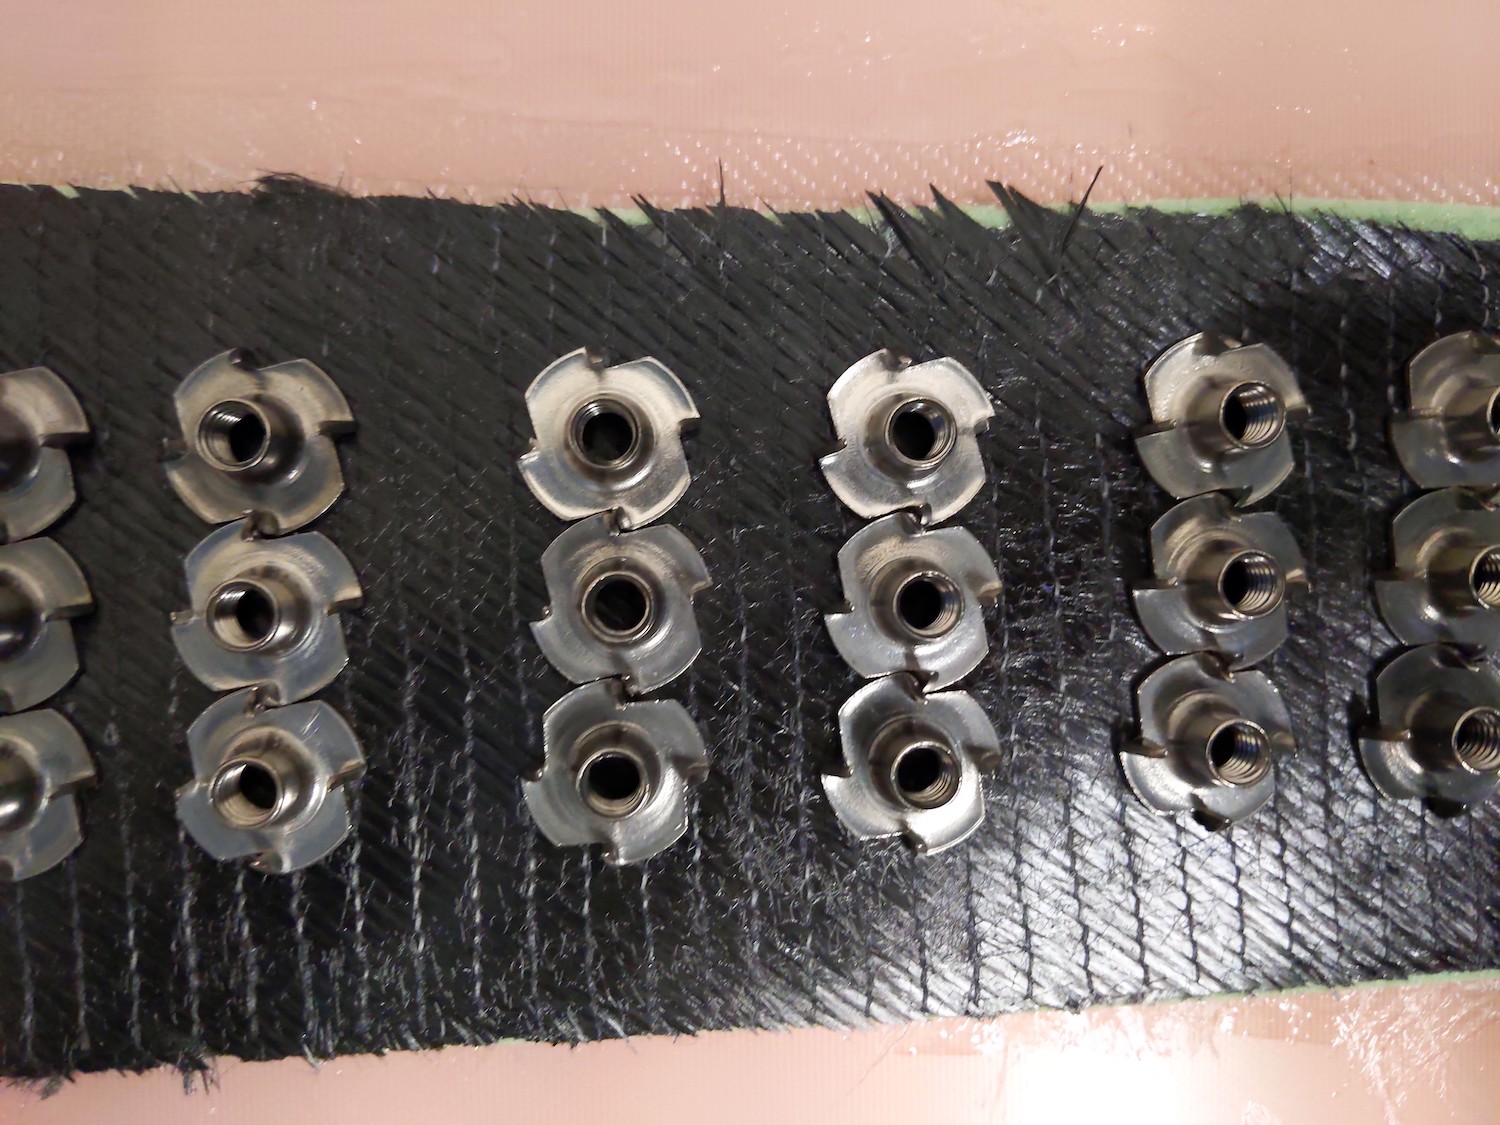 6 stainless seel drive-in nuts glued to carbon 2/3